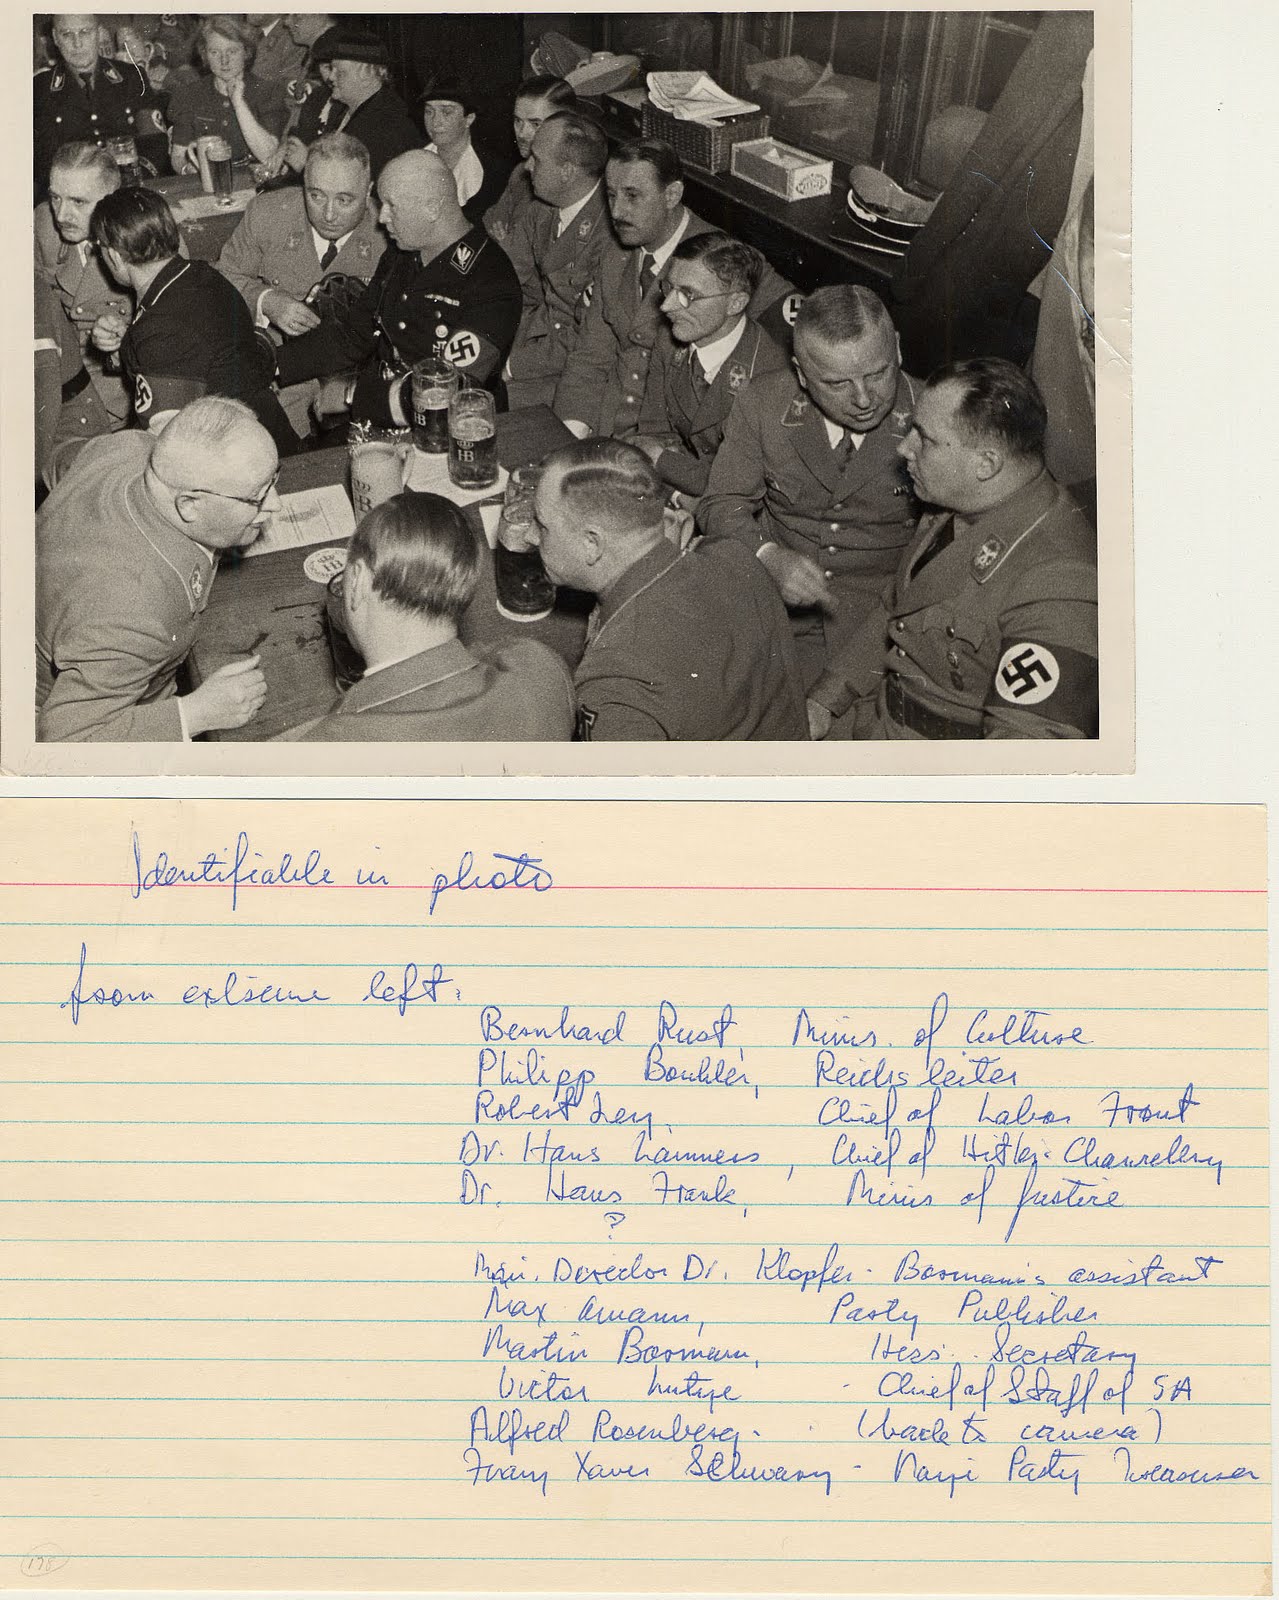 A photograph of Nazi officials drinking beer at a table alongside a card with a list of identifiable officials